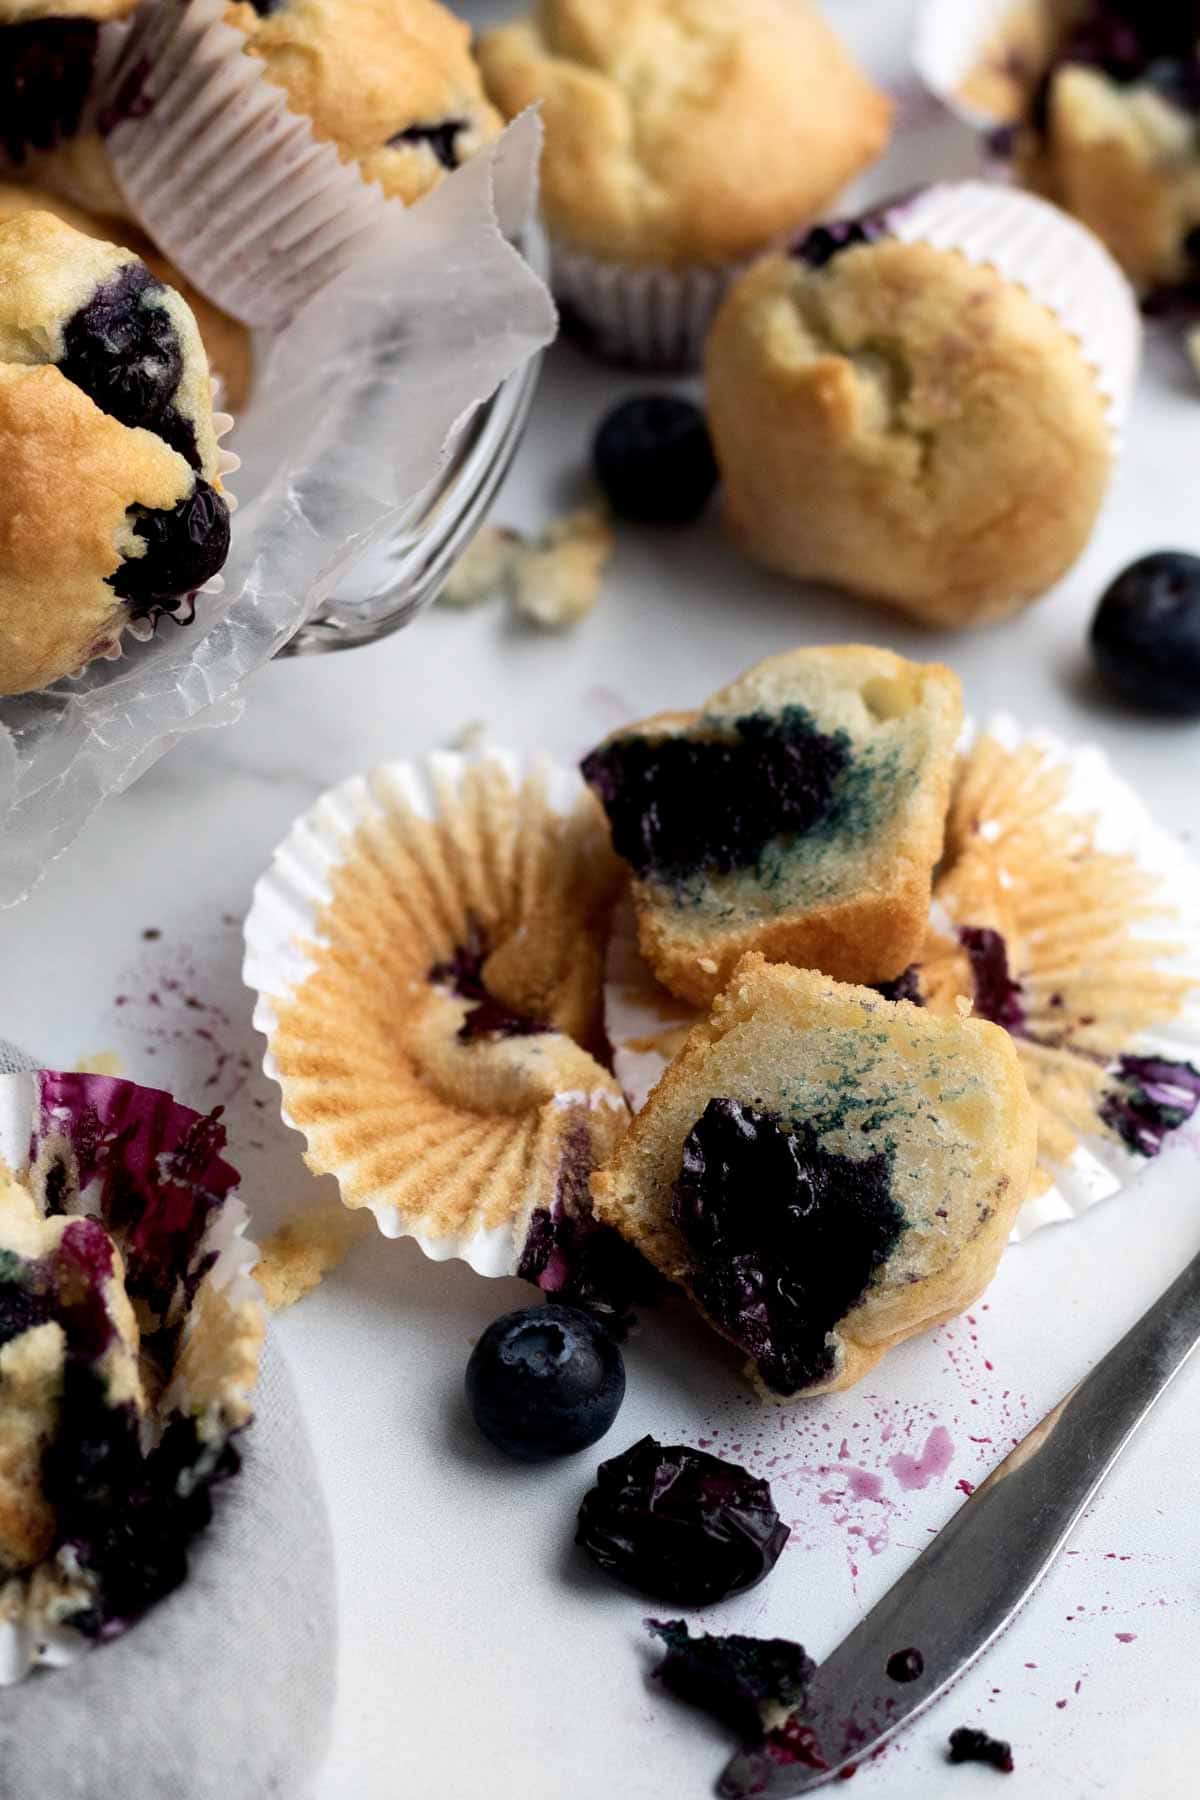 A blueberry muffin sliced in half.